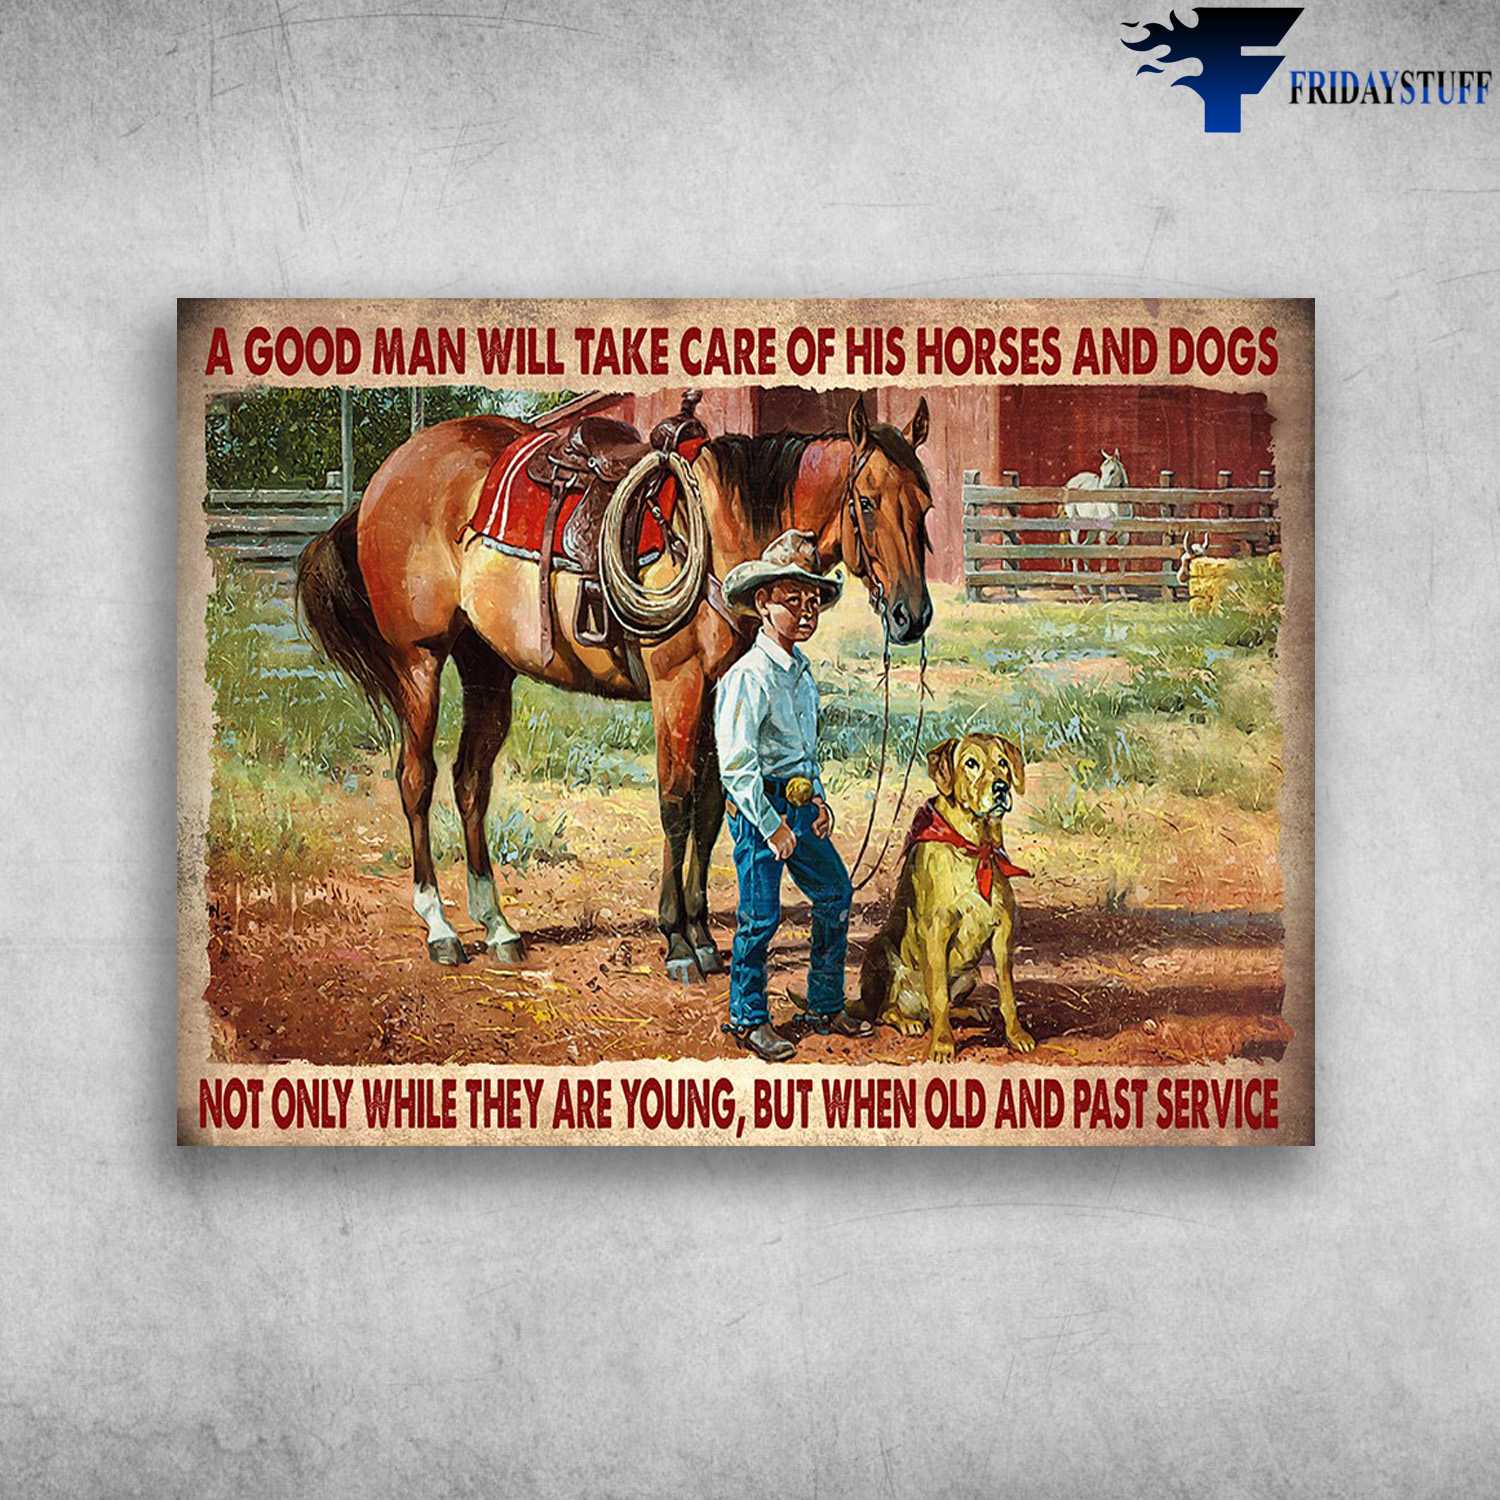 Cowboy Riding, Horse And Dog - A Good Man, Will Take Care Of, His Horses And Dogs, Not Only While They Are Young, But When Old And Past Service